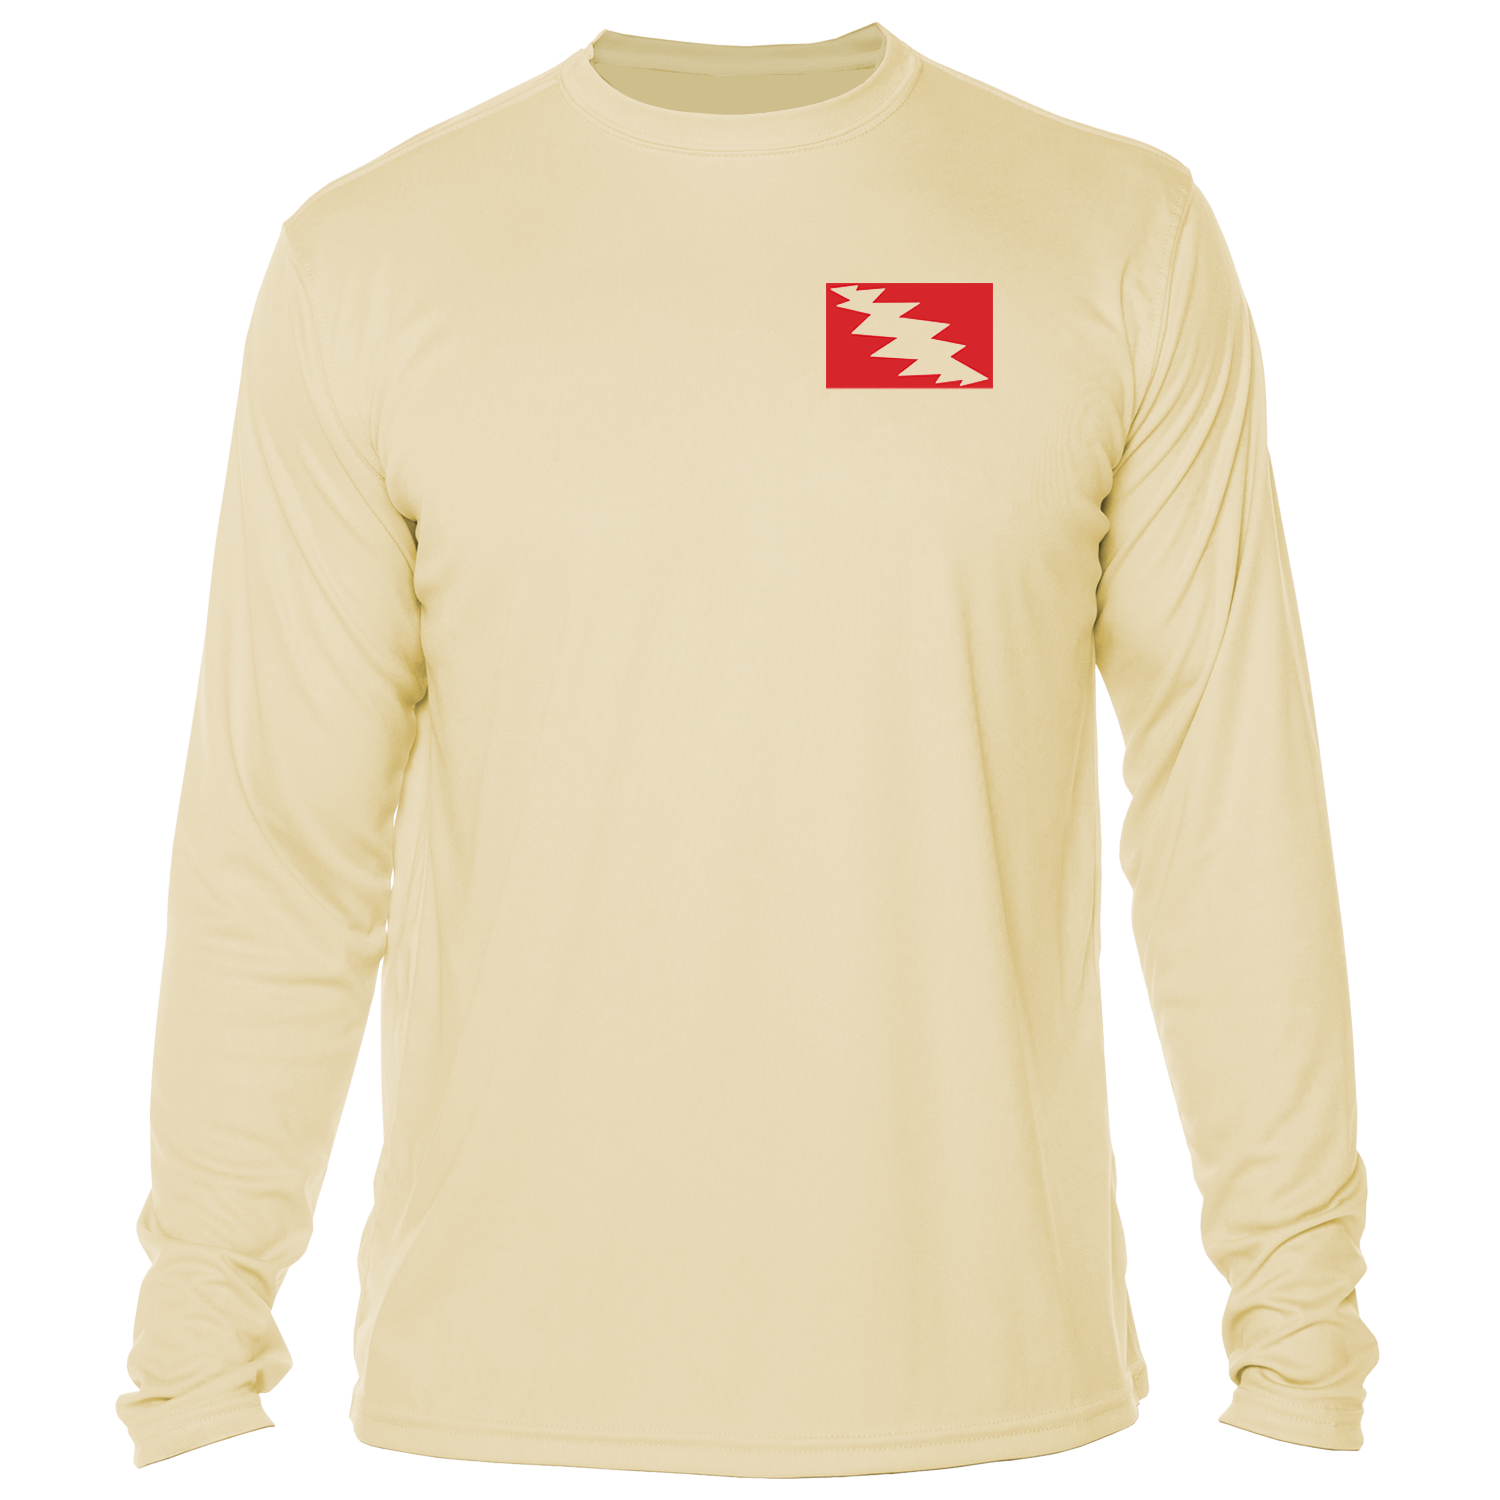 Grateful Diver Skeleton Diver UV Shirt in pale yellow showing the front off figure